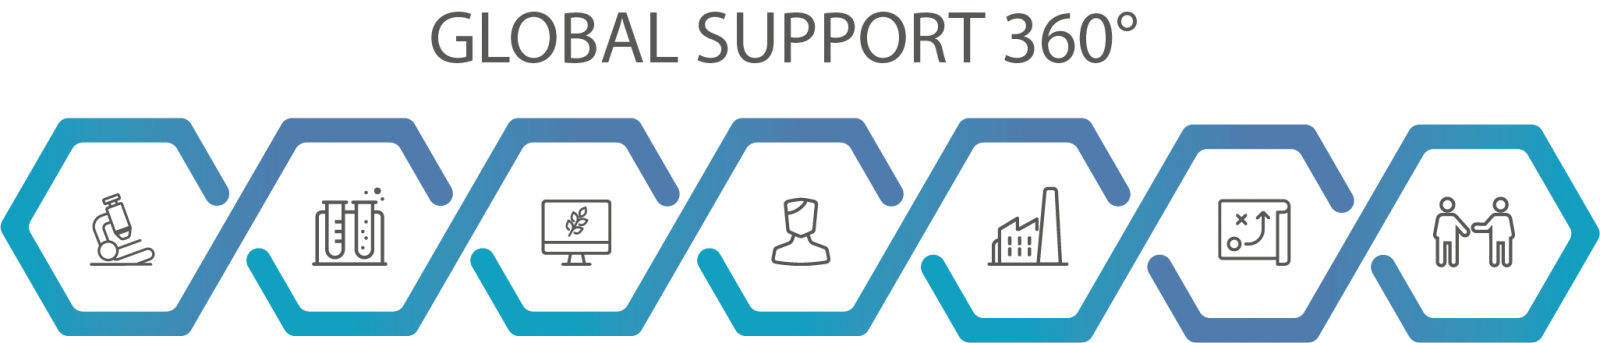 Global support 360°